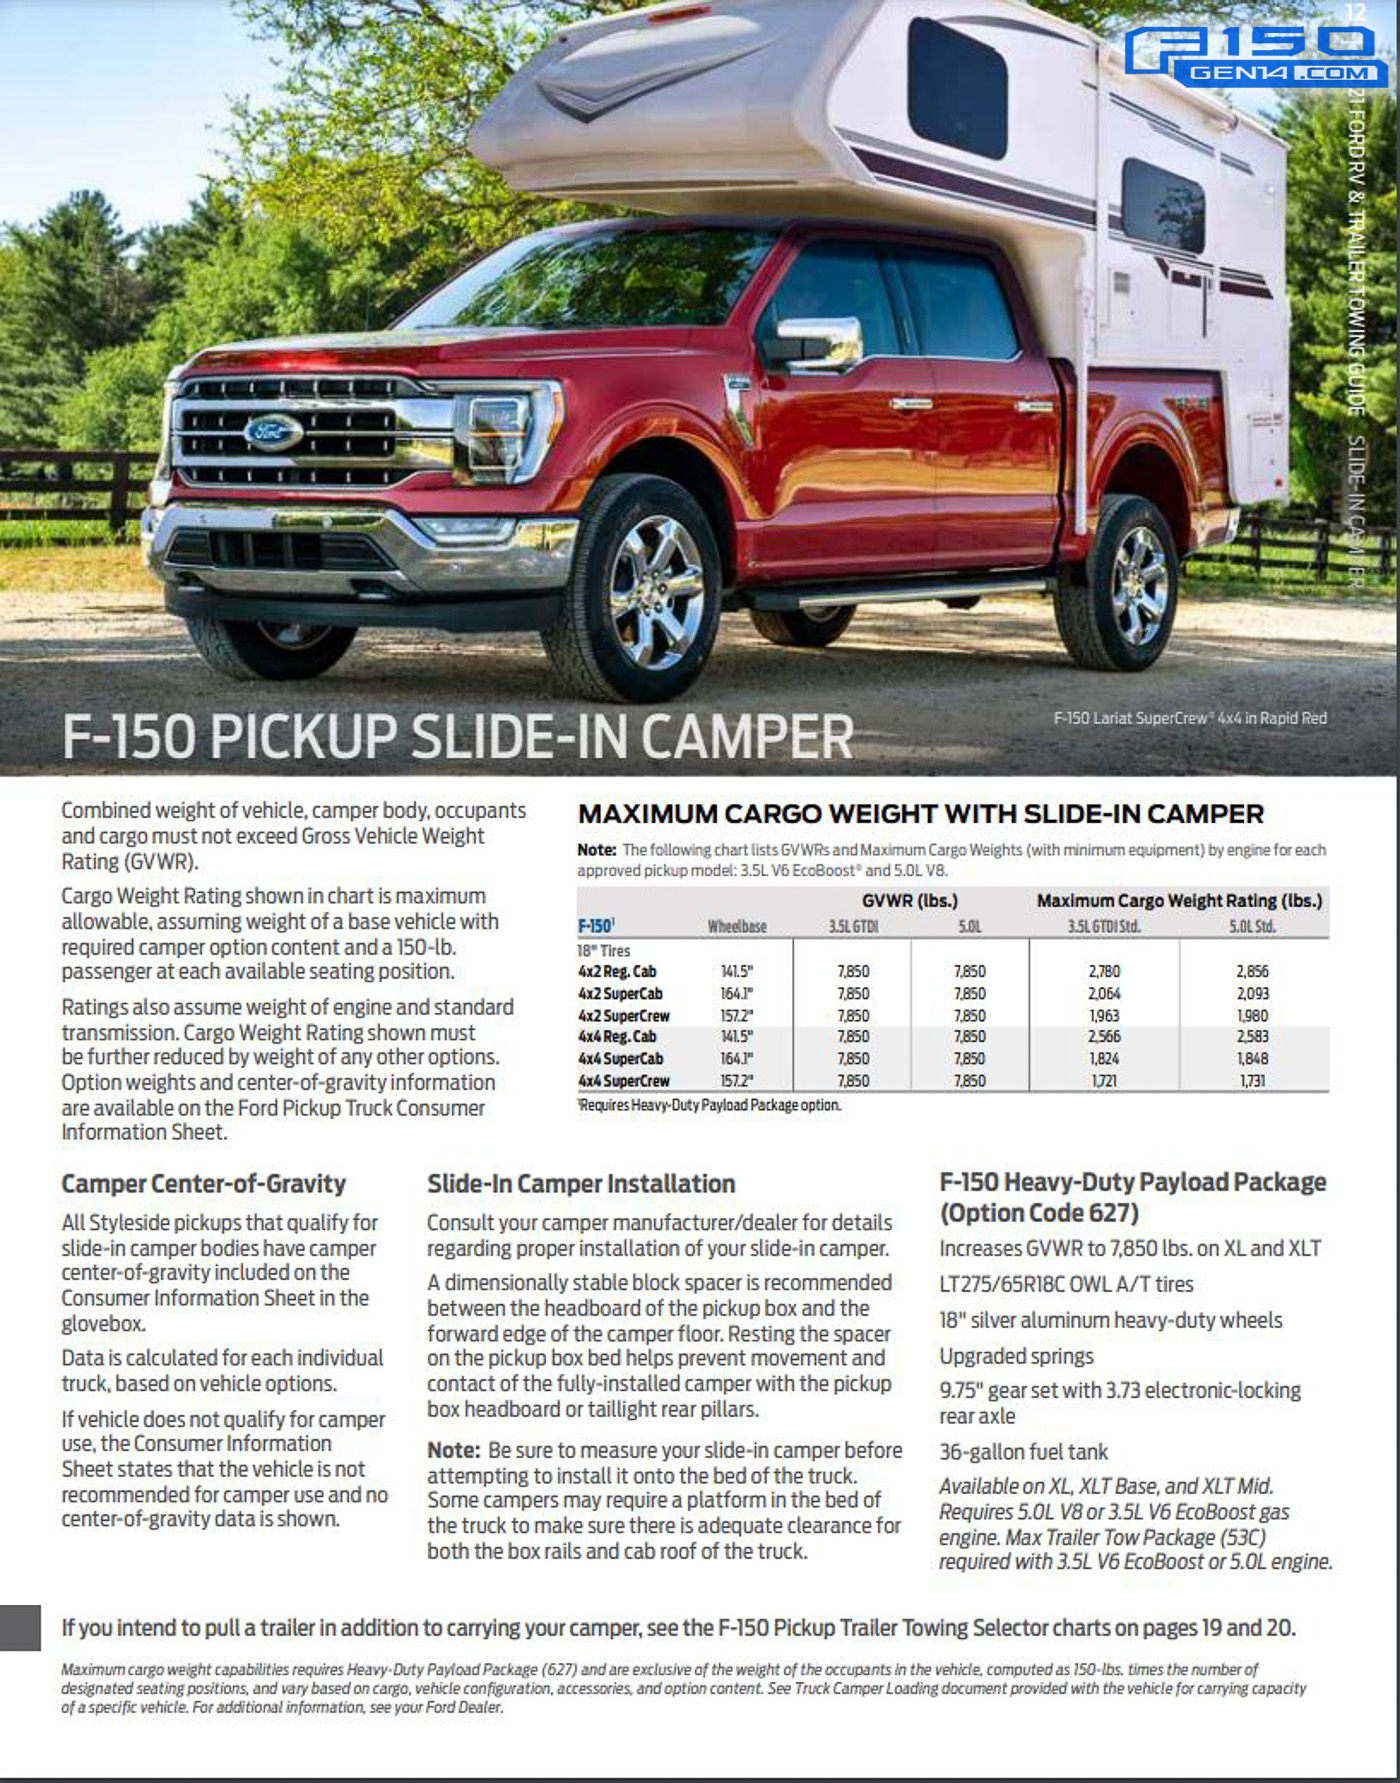 Ford F-150 Lightning 2021 F-150 Towing, 5th Wheel Towing and Cargo / Payload Capacity Figures 2021-F-150-Towing-Payload-Capacity-Guide-03